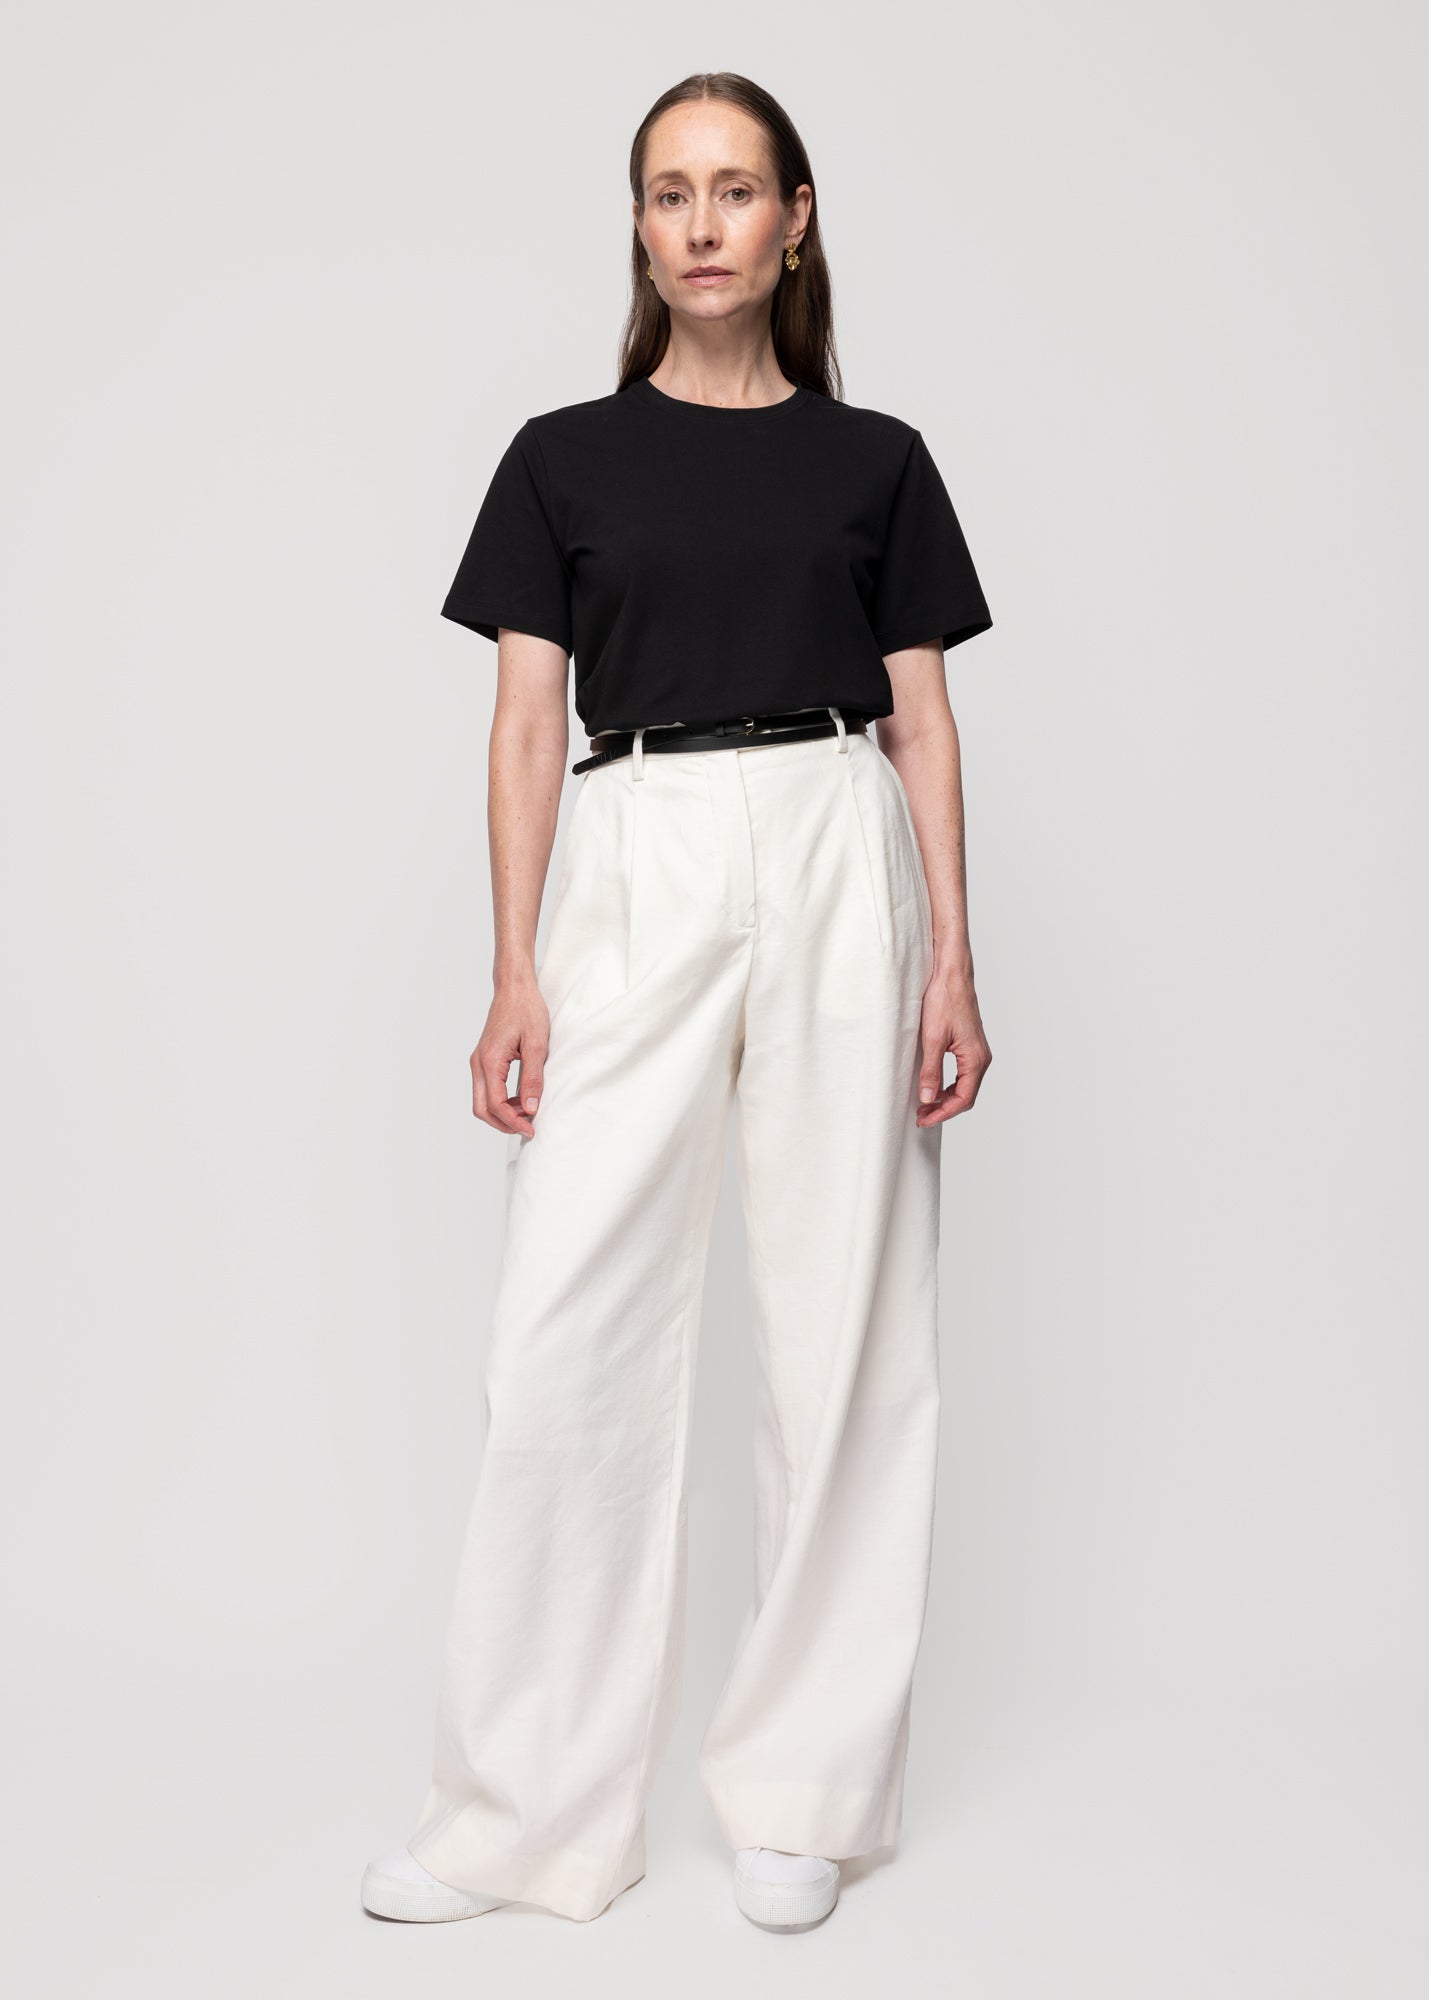 Linen Trousers tailored wide